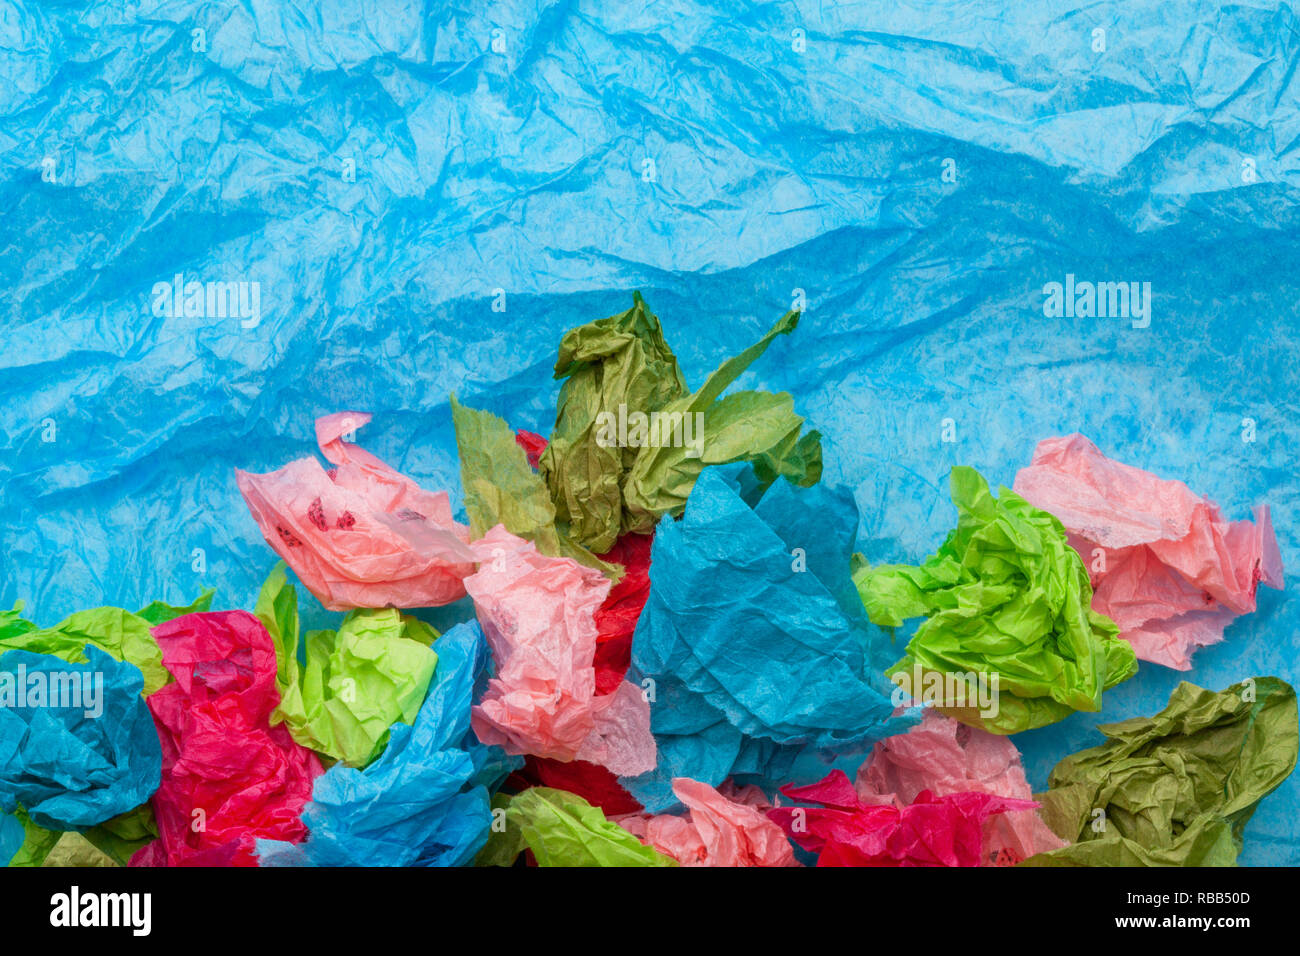 Crumpled colorful tissue paper on a blue tissue paper background Stock Photo